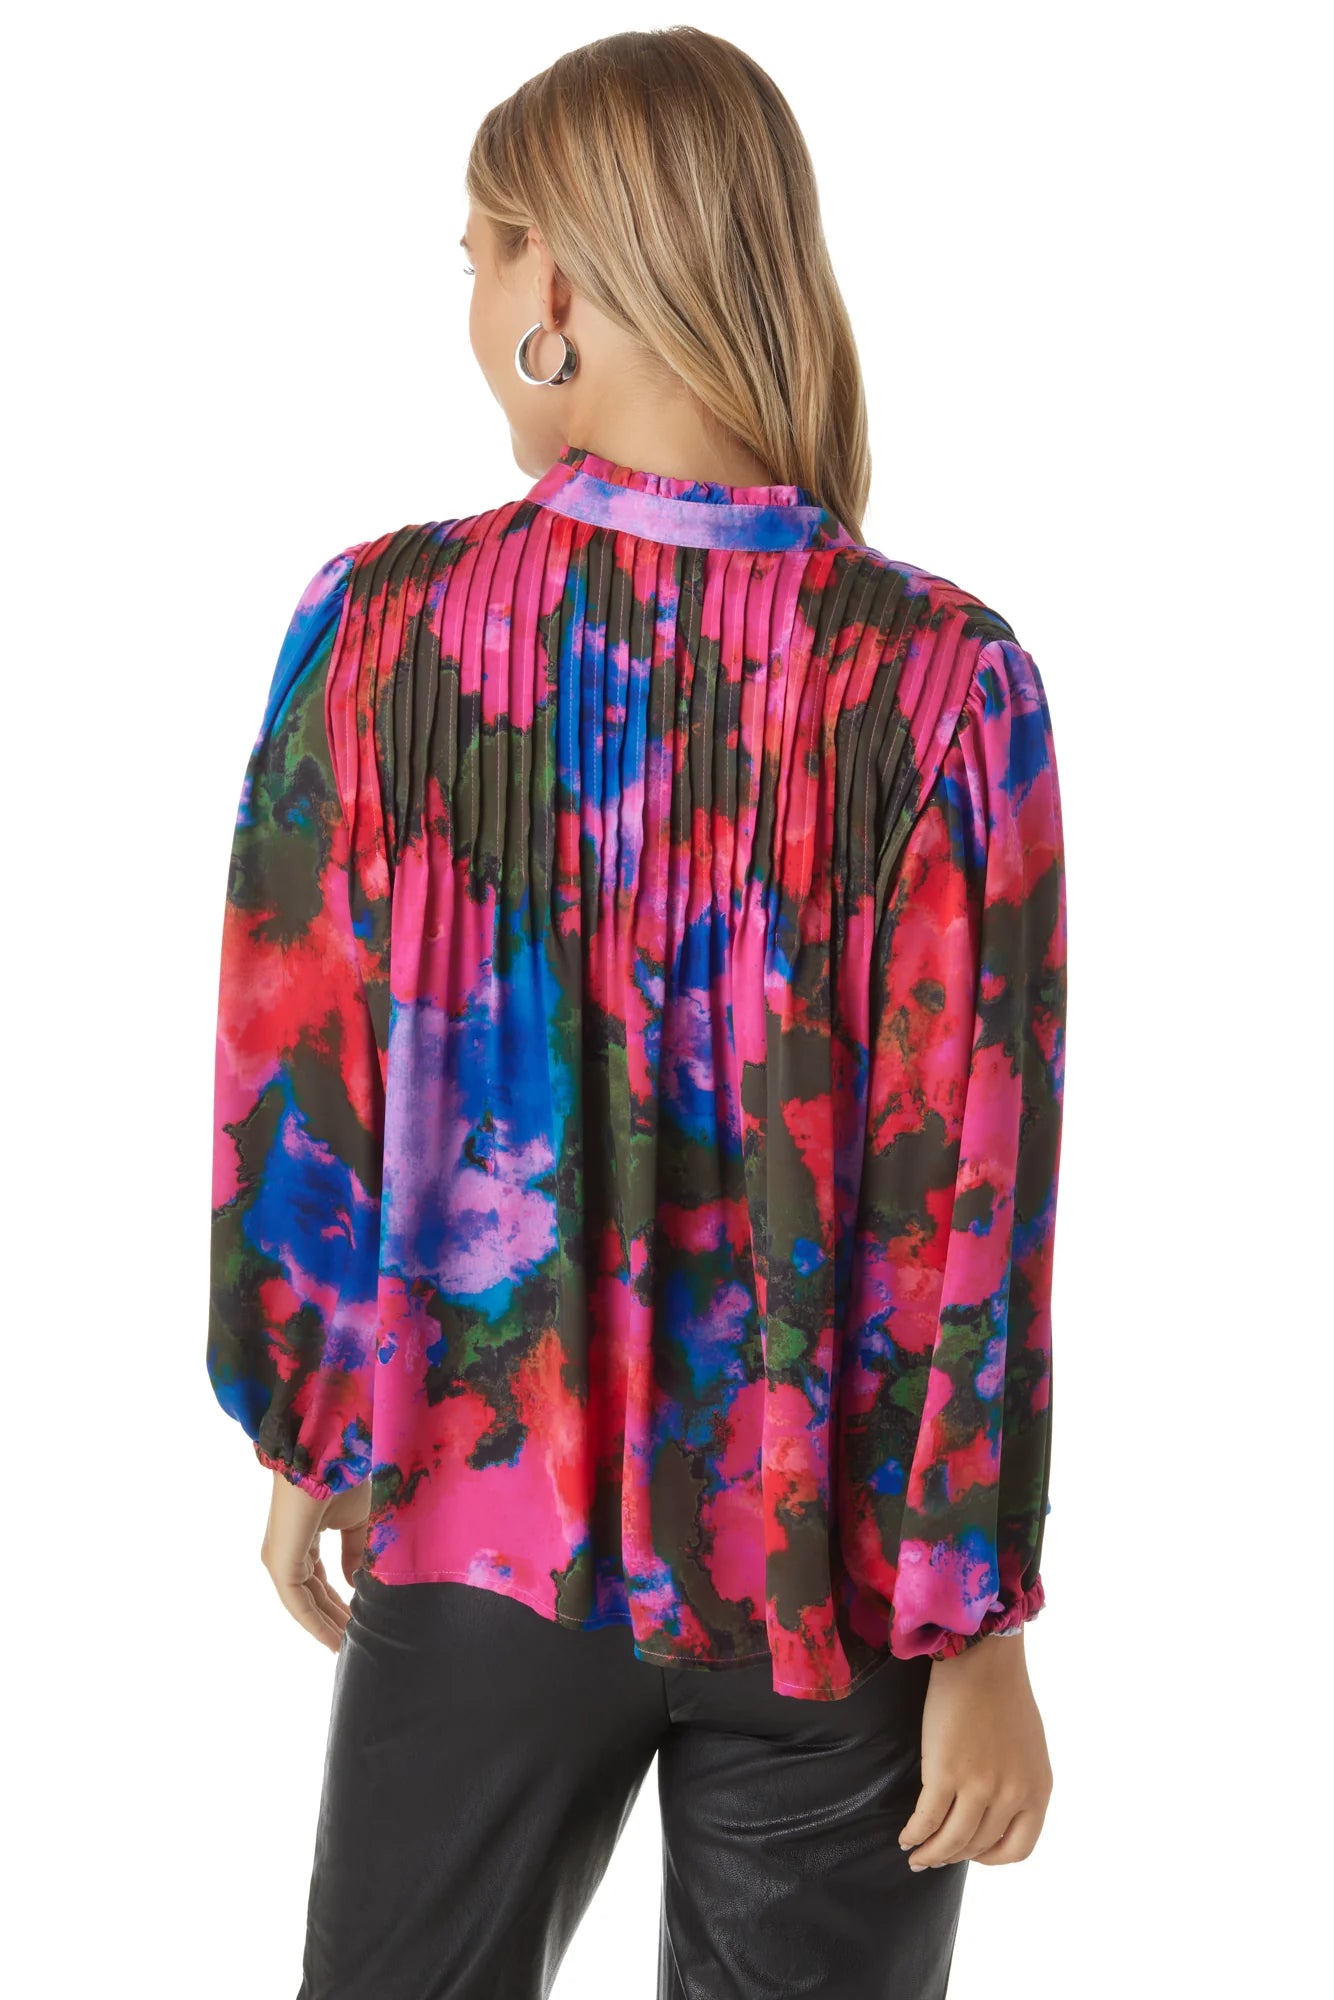 gabby blouse blurred floral